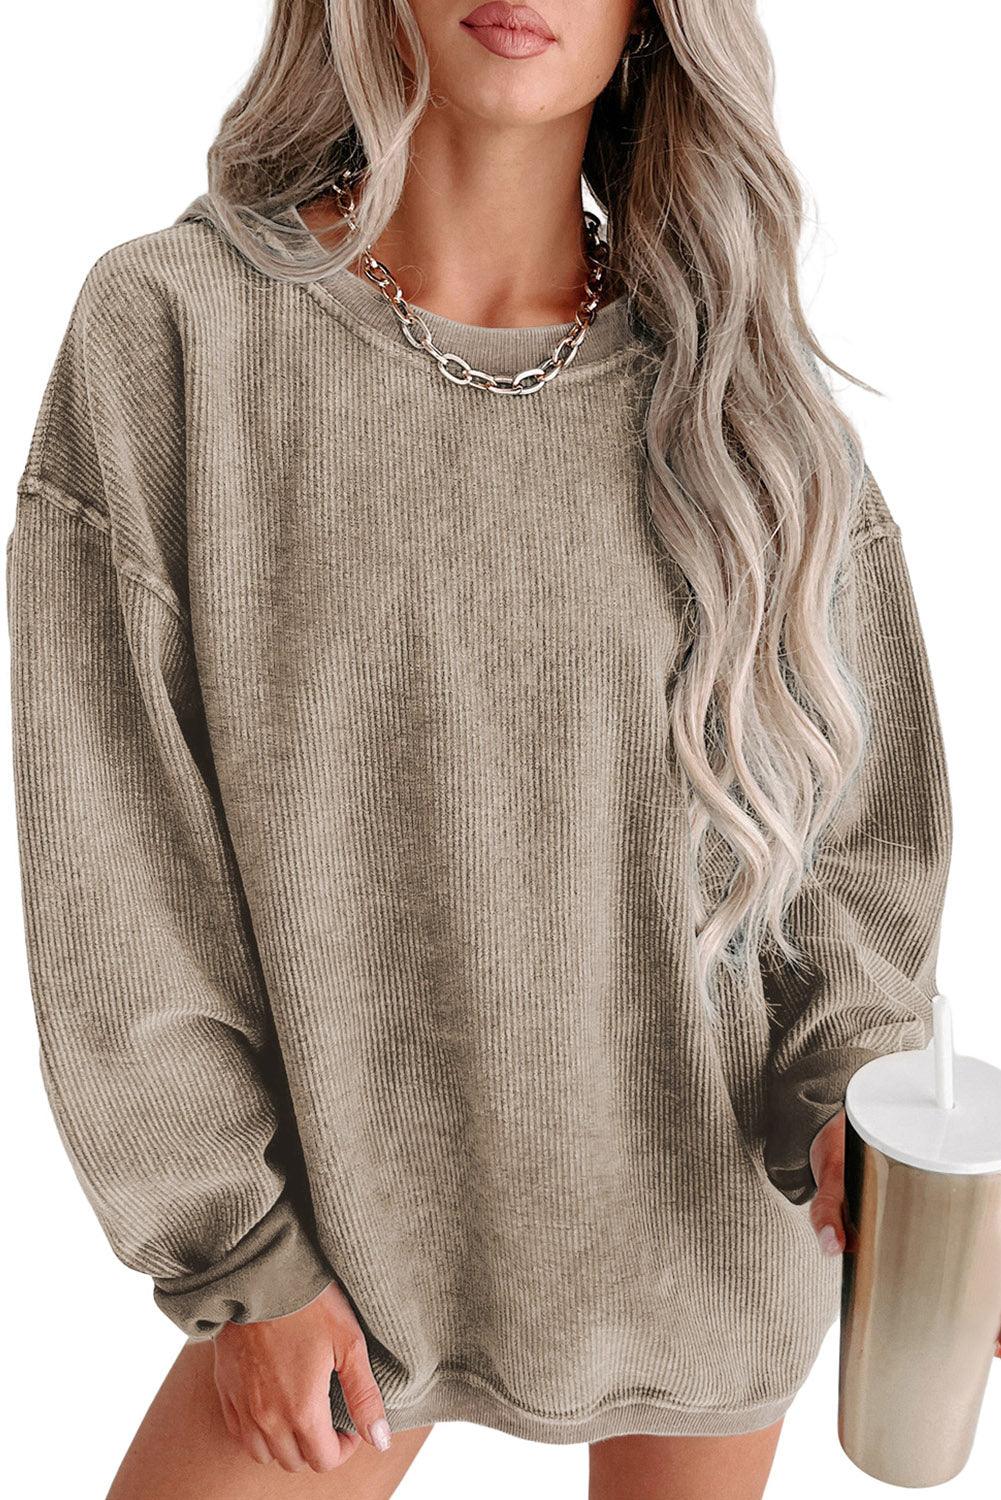 Gray Solid Ribbed Knit Round Neck Pullover Sweatshirt - L & M Kee, LLC